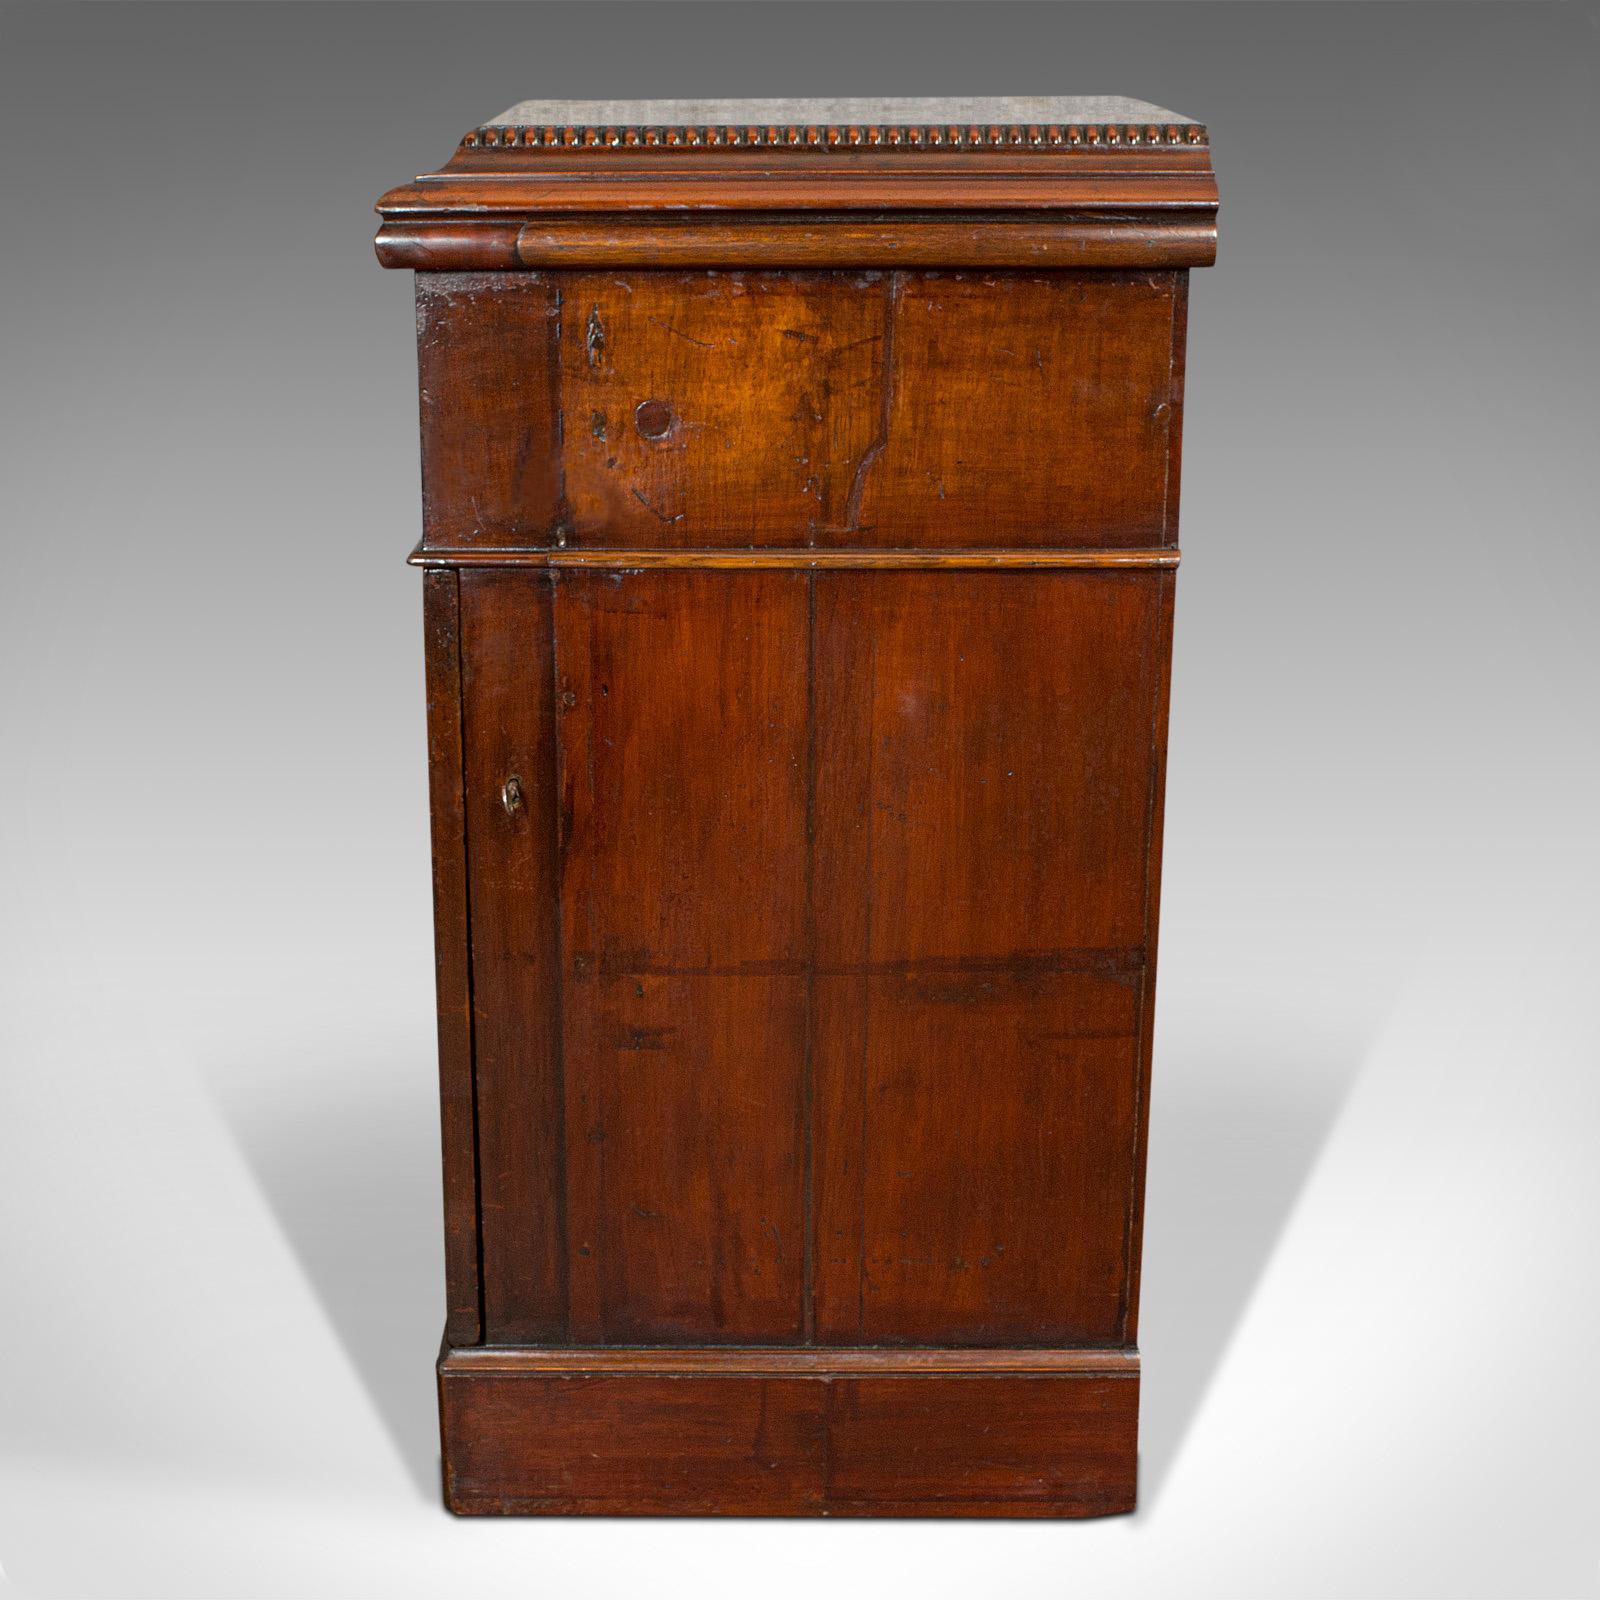 19th Century Tall Antique Side Cabinet, English, Mahogany, Bedside, Nightstand, Regency, 1820